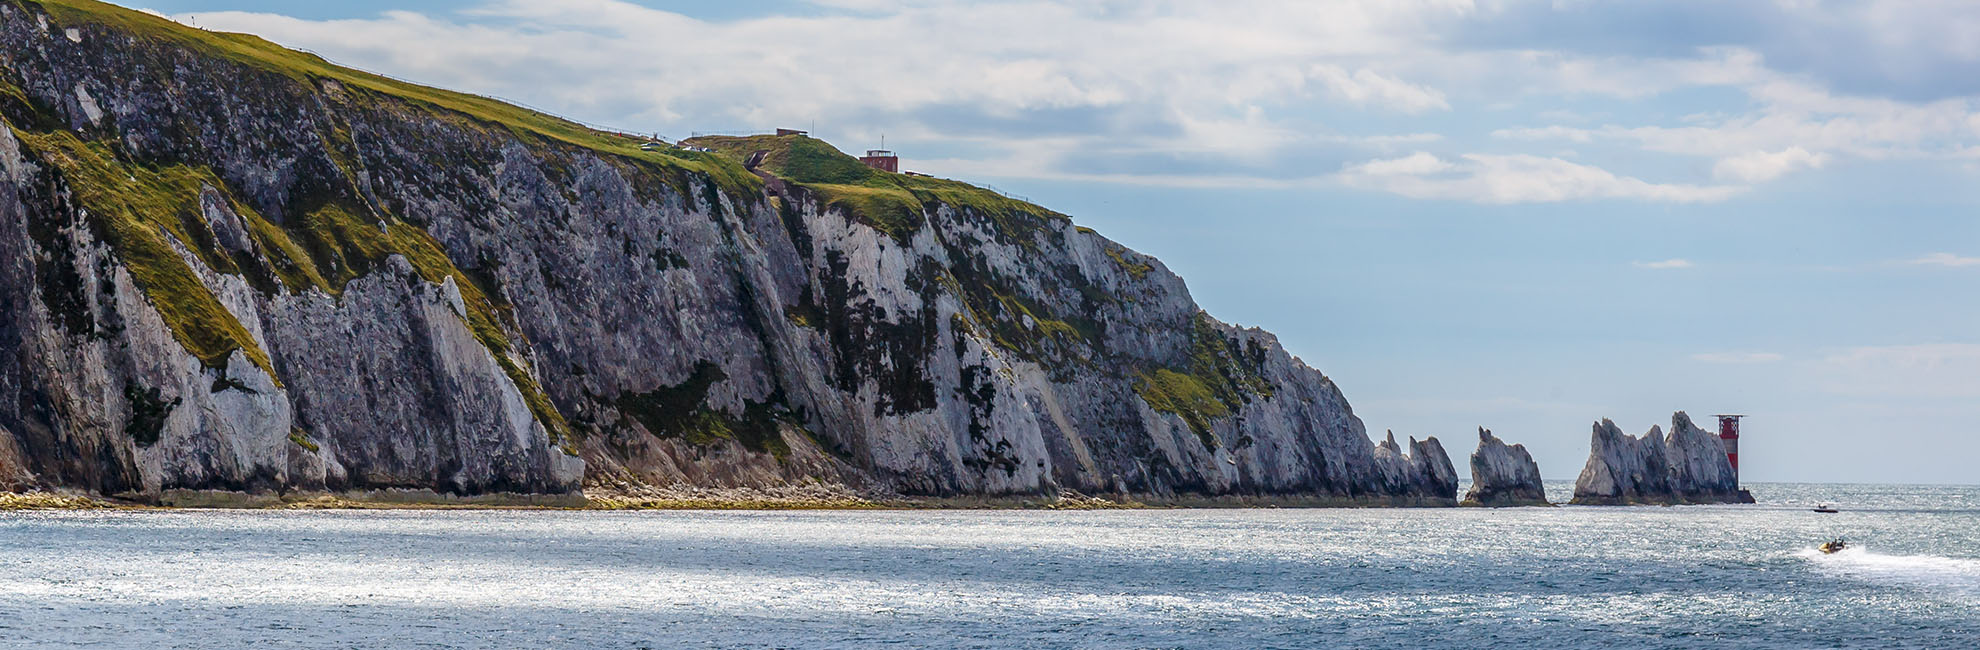 The Isle of Wight Needles